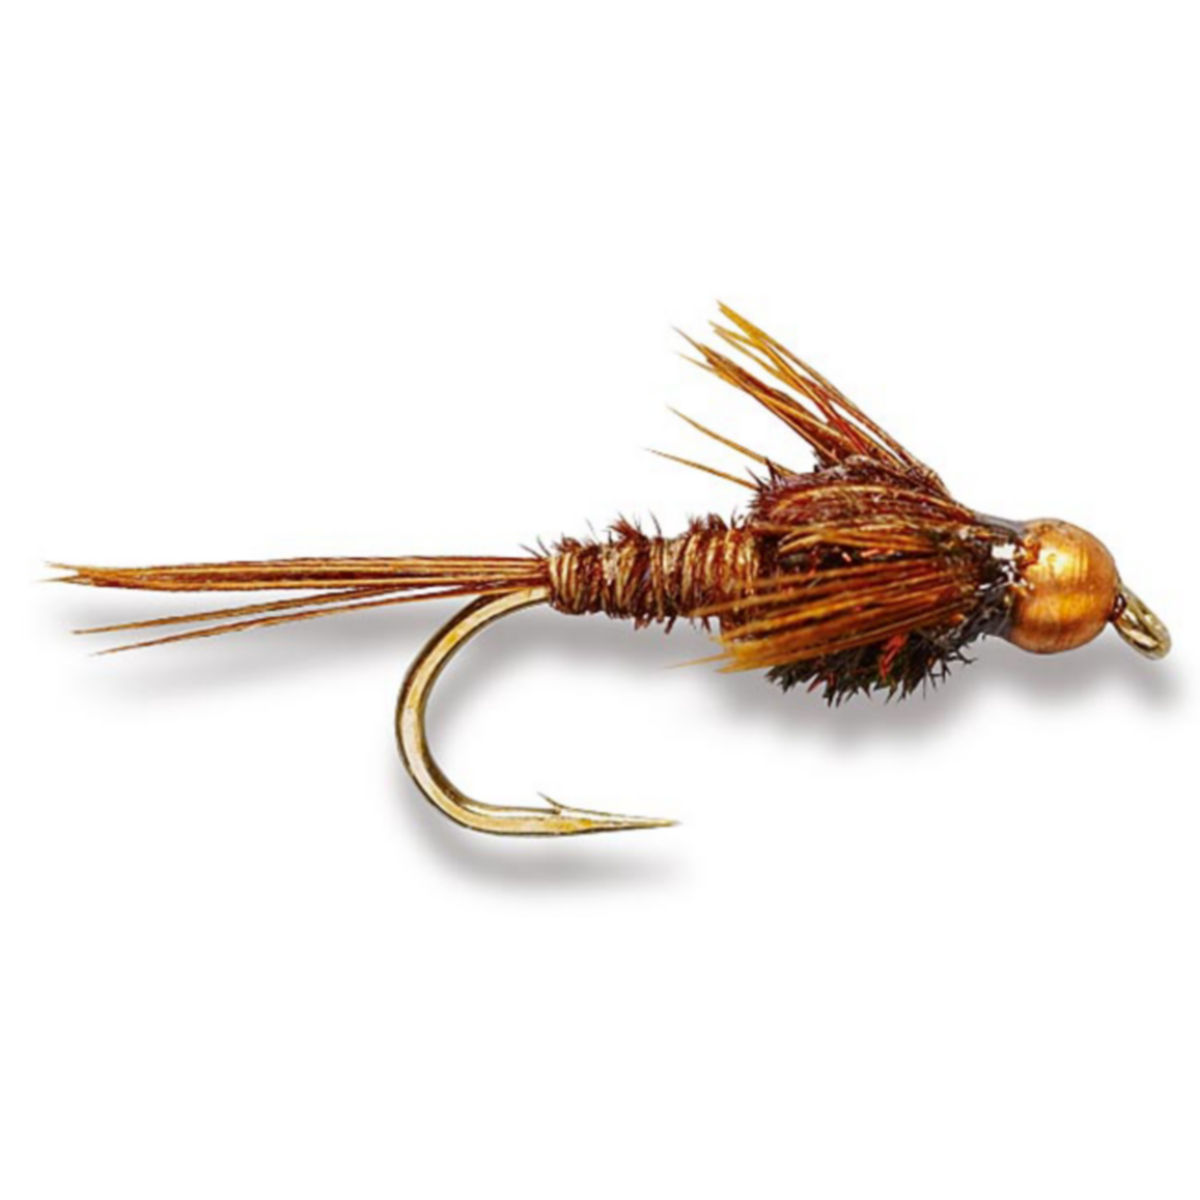 6 Flies Hook Size 10 Fly Fishing Flies Pheasant Tail Bead Head Nymph Fly 